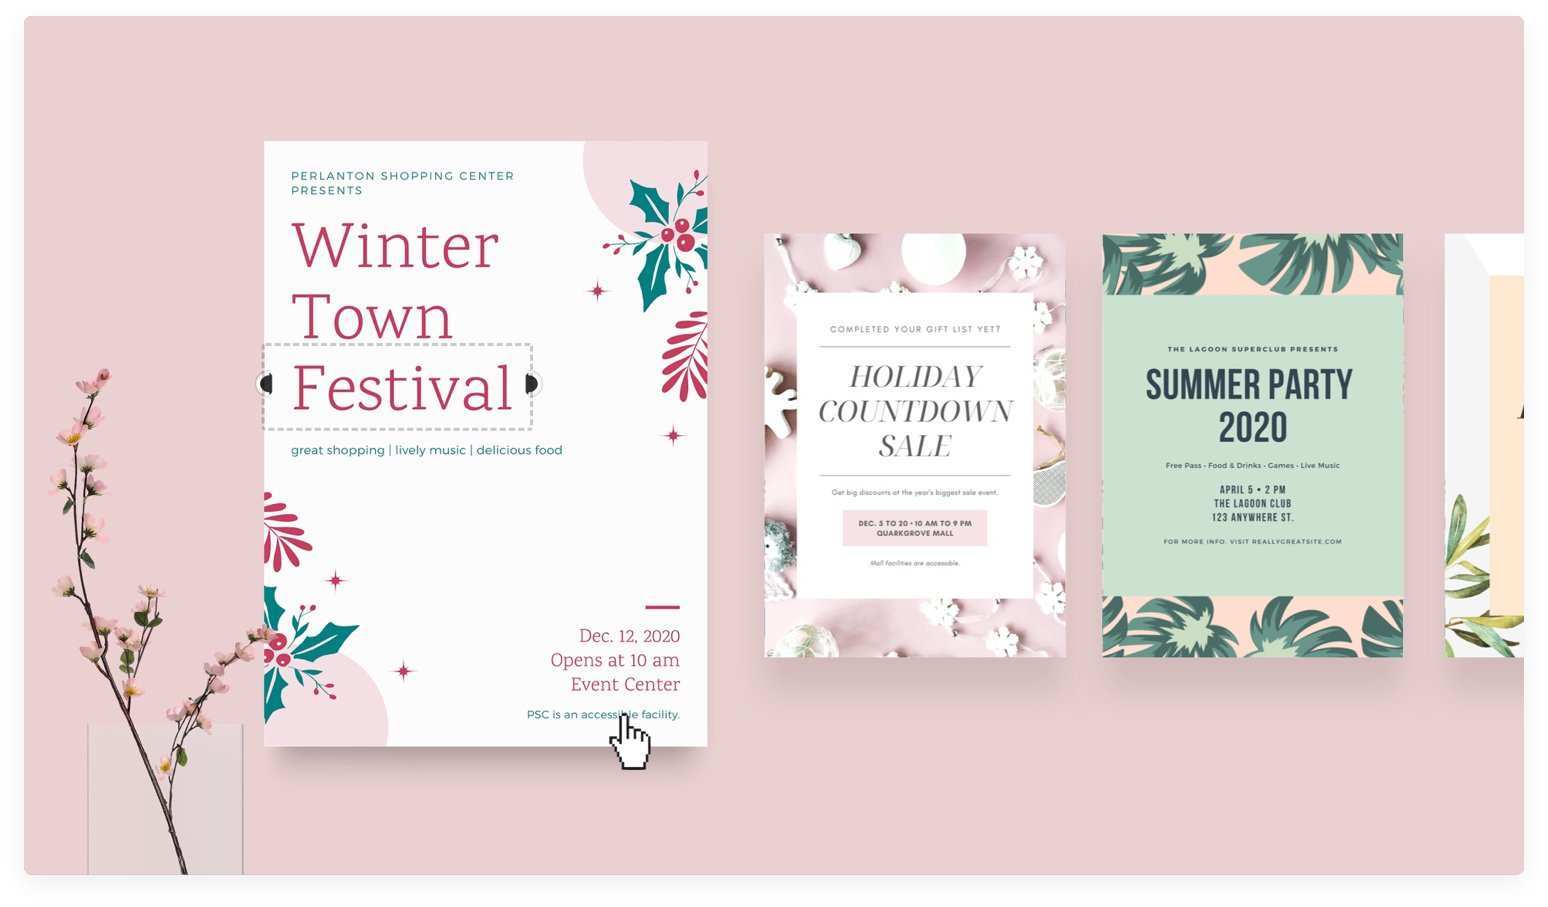 18 Format Flyers Design Templates Free in Word by Flyers Design Templates Free